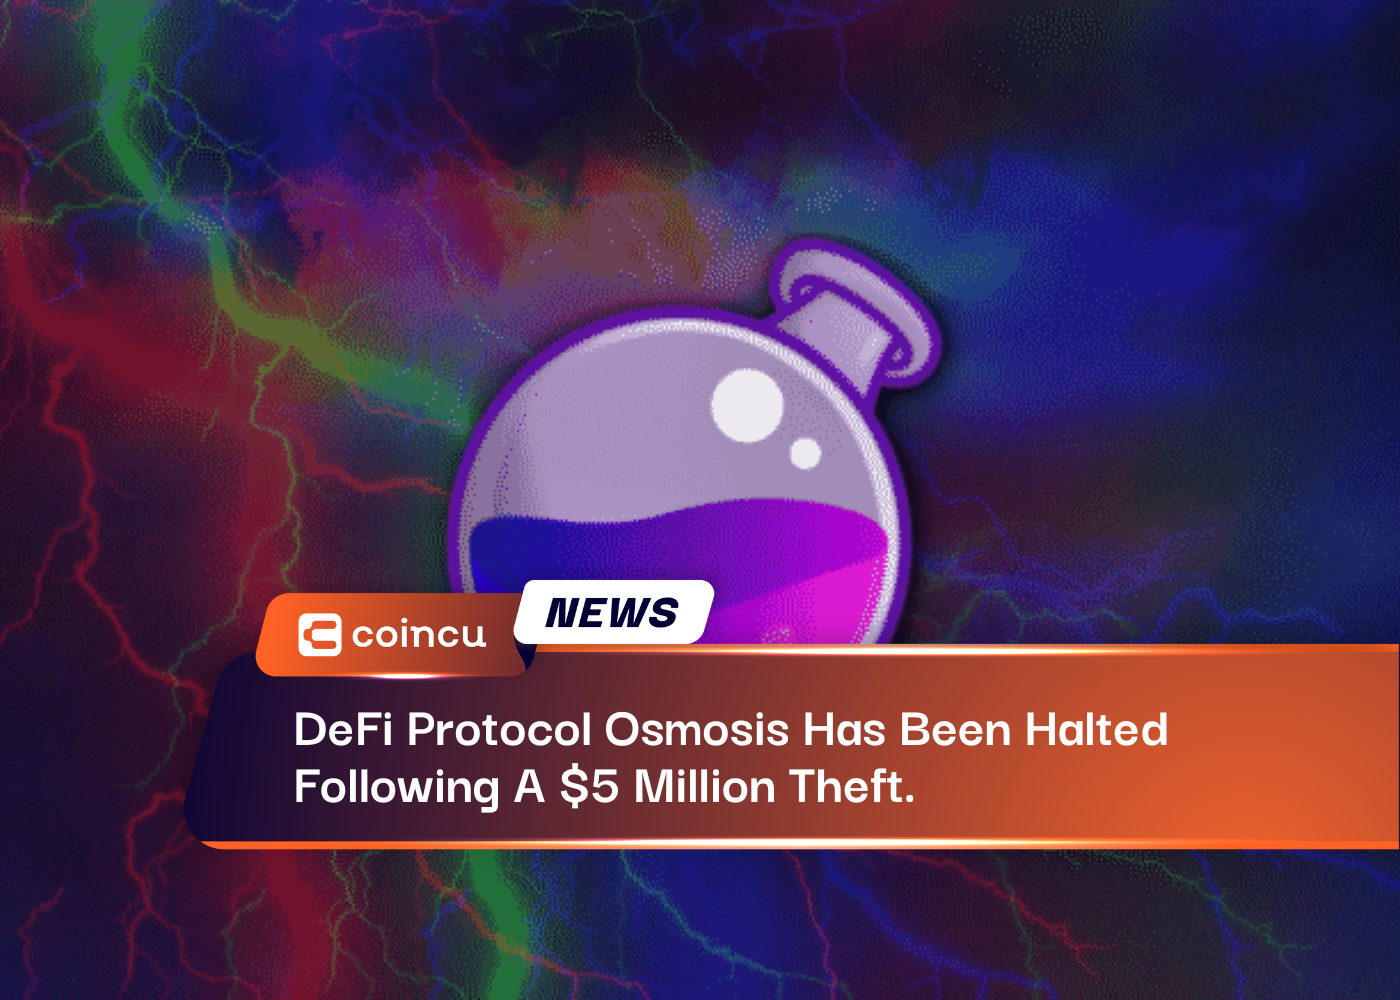 DeFi Protocol Osmosis Has Been Halted Following A $5 Million Theft.